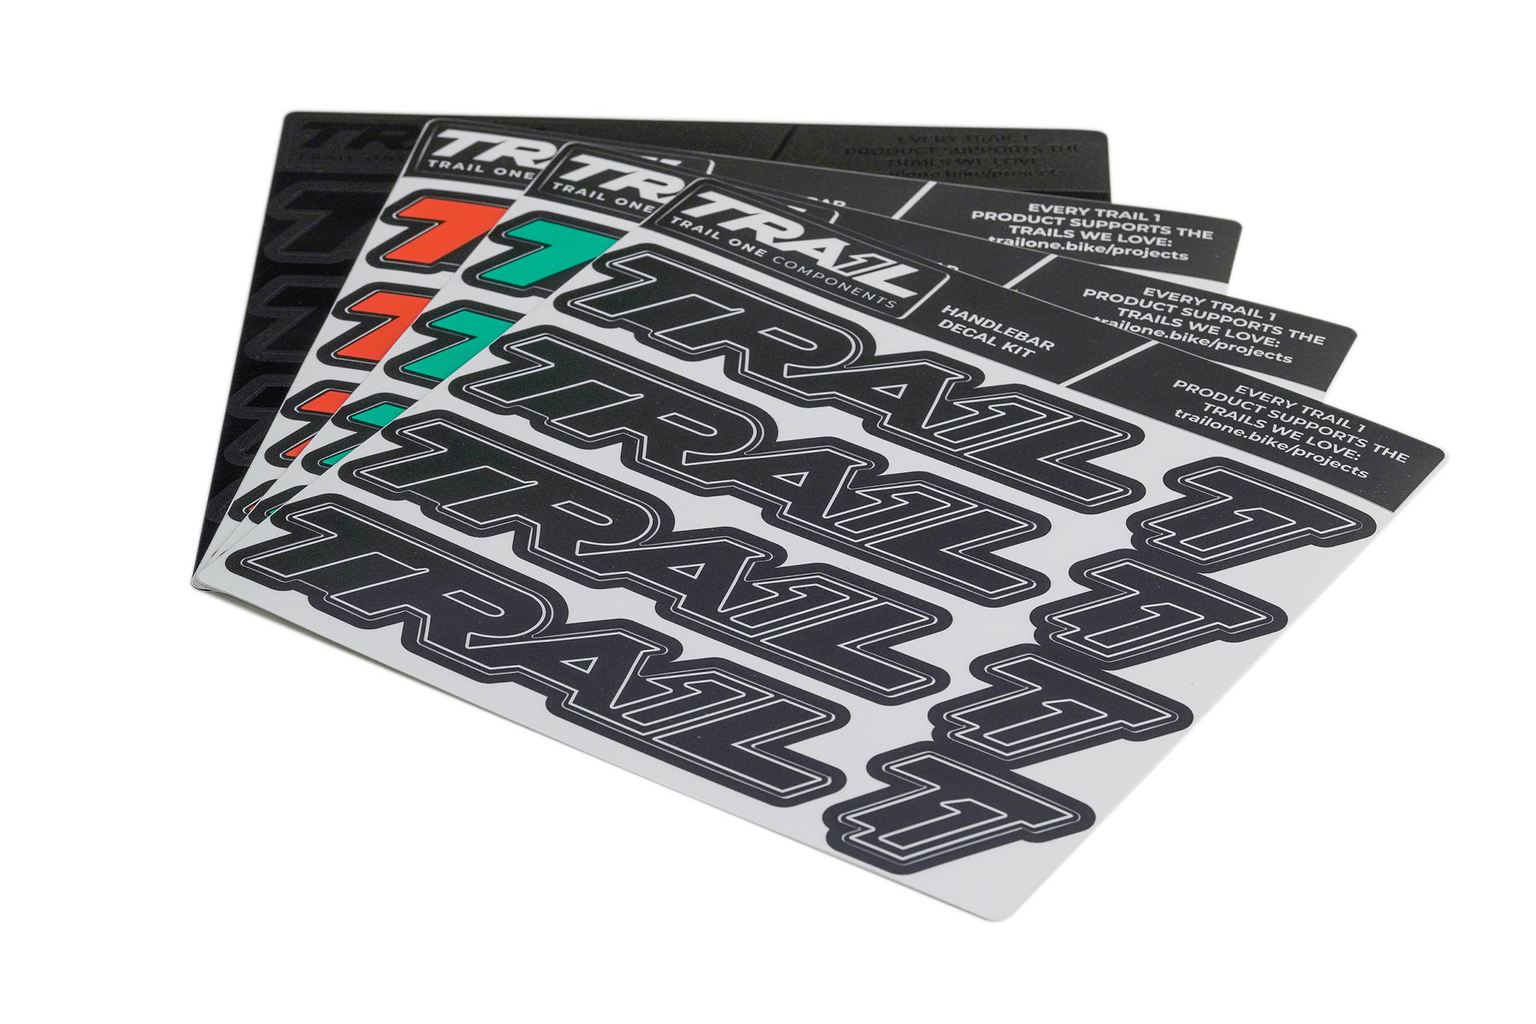 Trail One Components Crockett Handlebar Decal Kit - Black/White Outline MPN: 0018-2 Sticker/Decal Crockett Handlebar Decal Kit